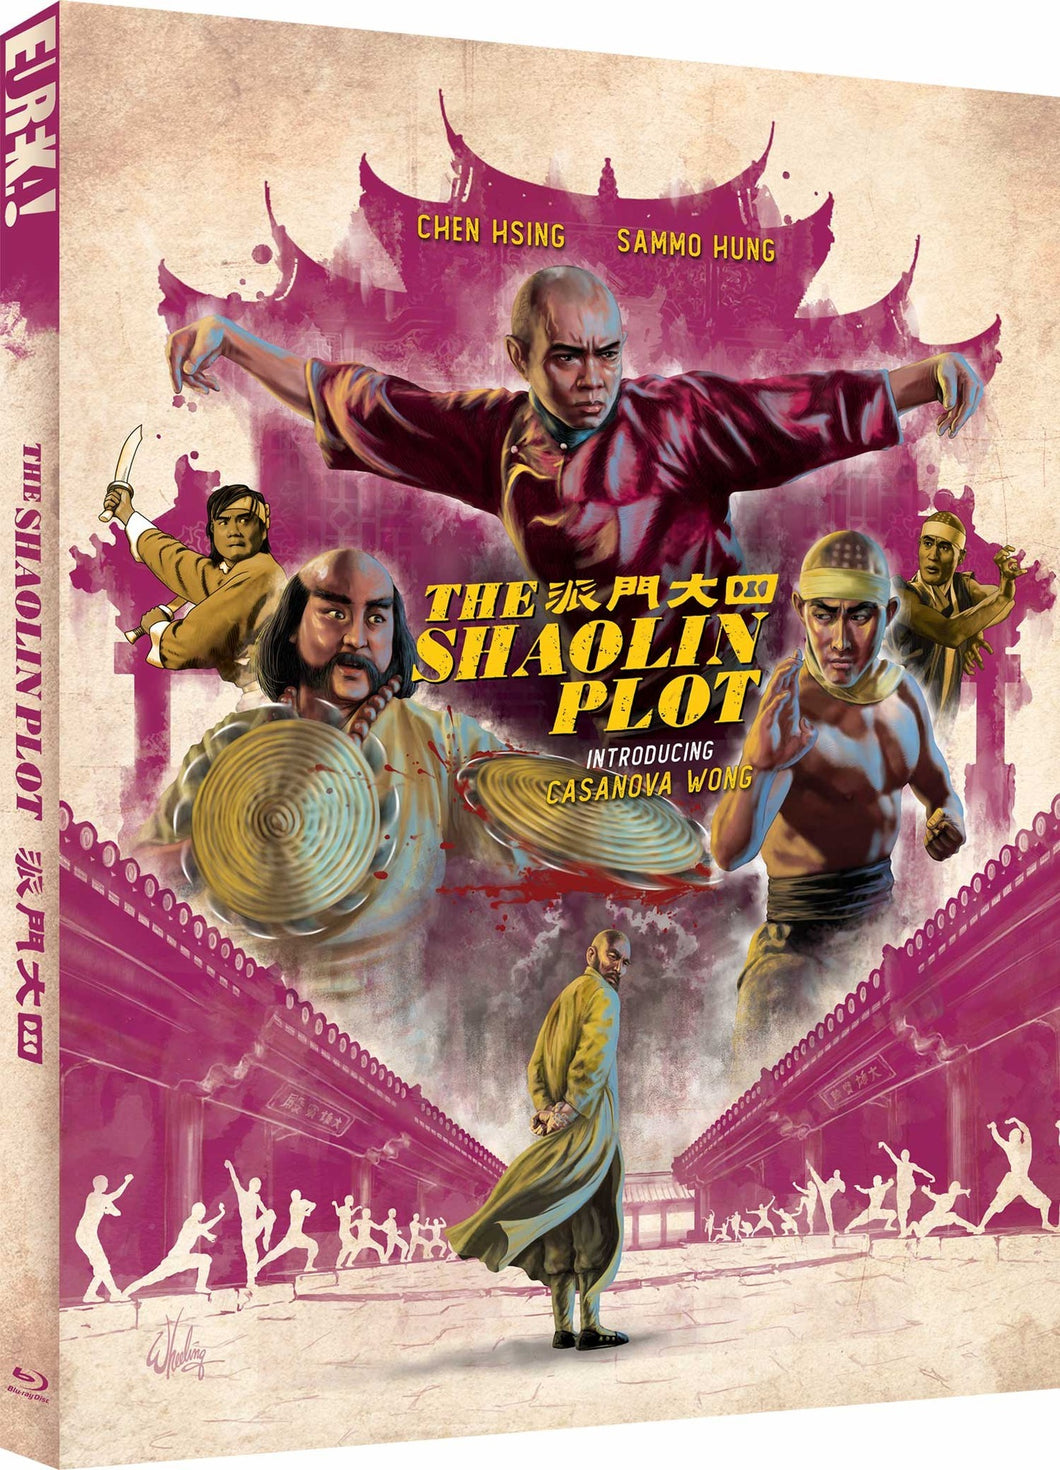 The Shaolin Plot (1977) _- front cover